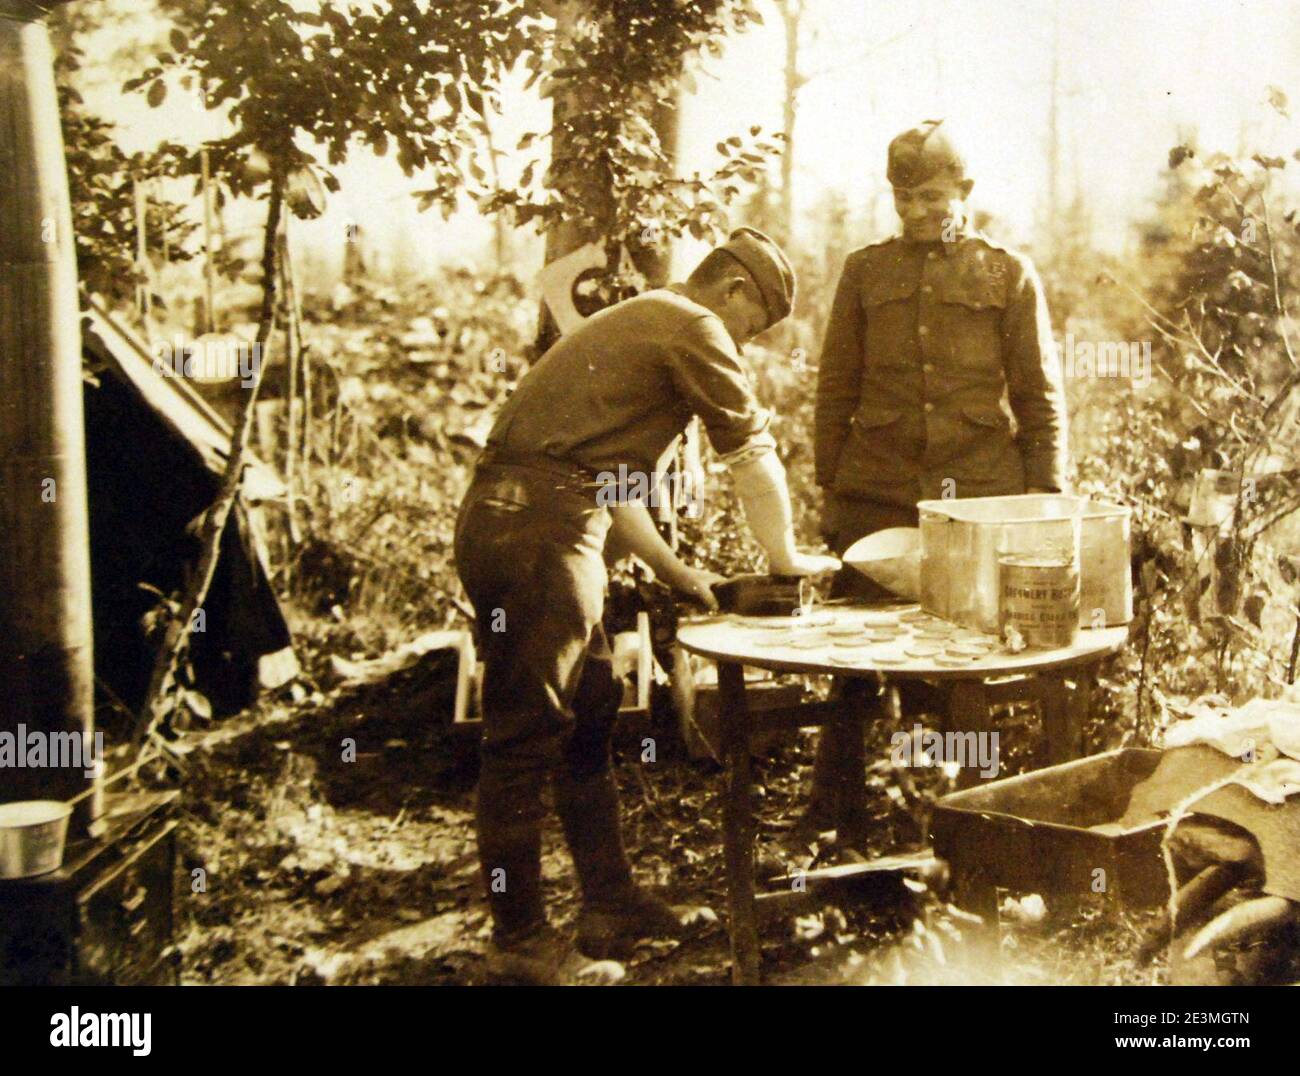 Making cookies at the front, 130th Infantry Supply Co., 33rd Division near St. Remy, France, 1918 (30324132660). Stock Photo